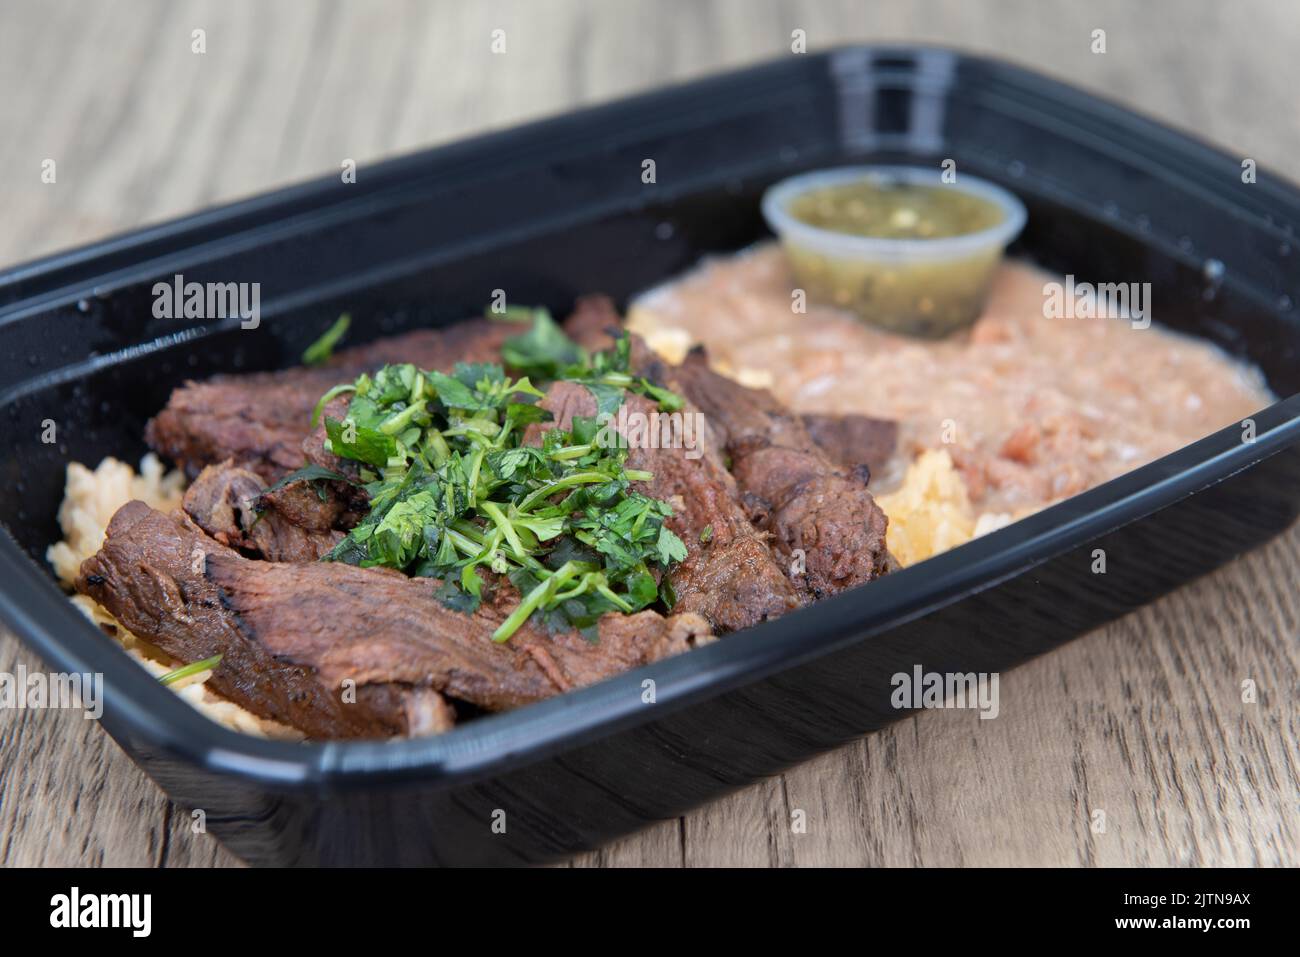 Take out order of ranchera with rice and beans is conveniently packed in a microwavable container. Stock Photo